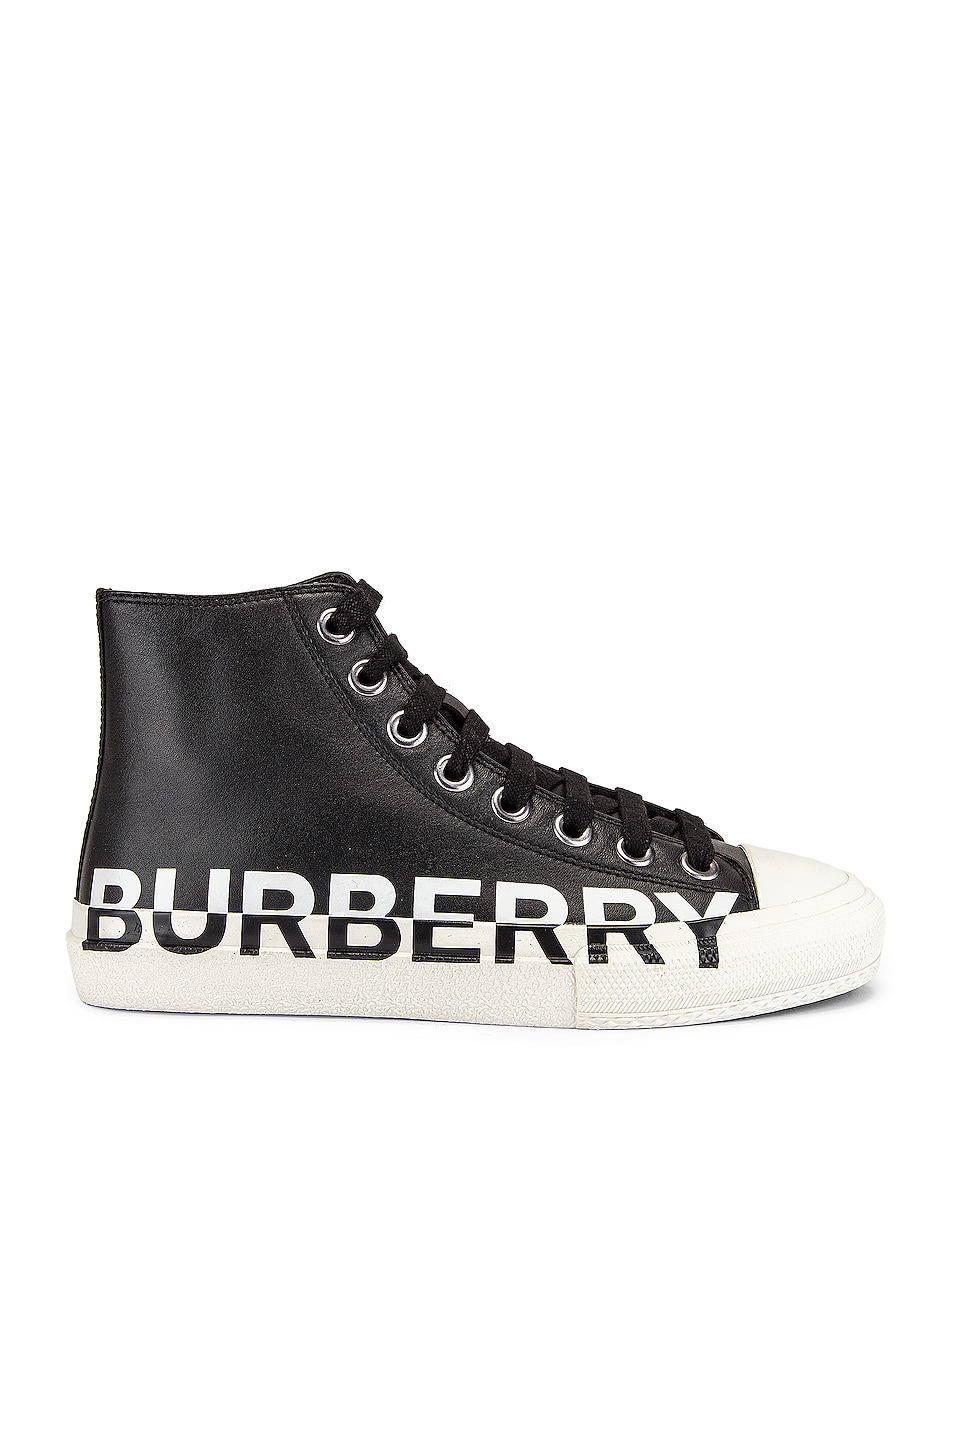 Image 1 of Burberry Larkhall Logo High Top Sneakers in Black